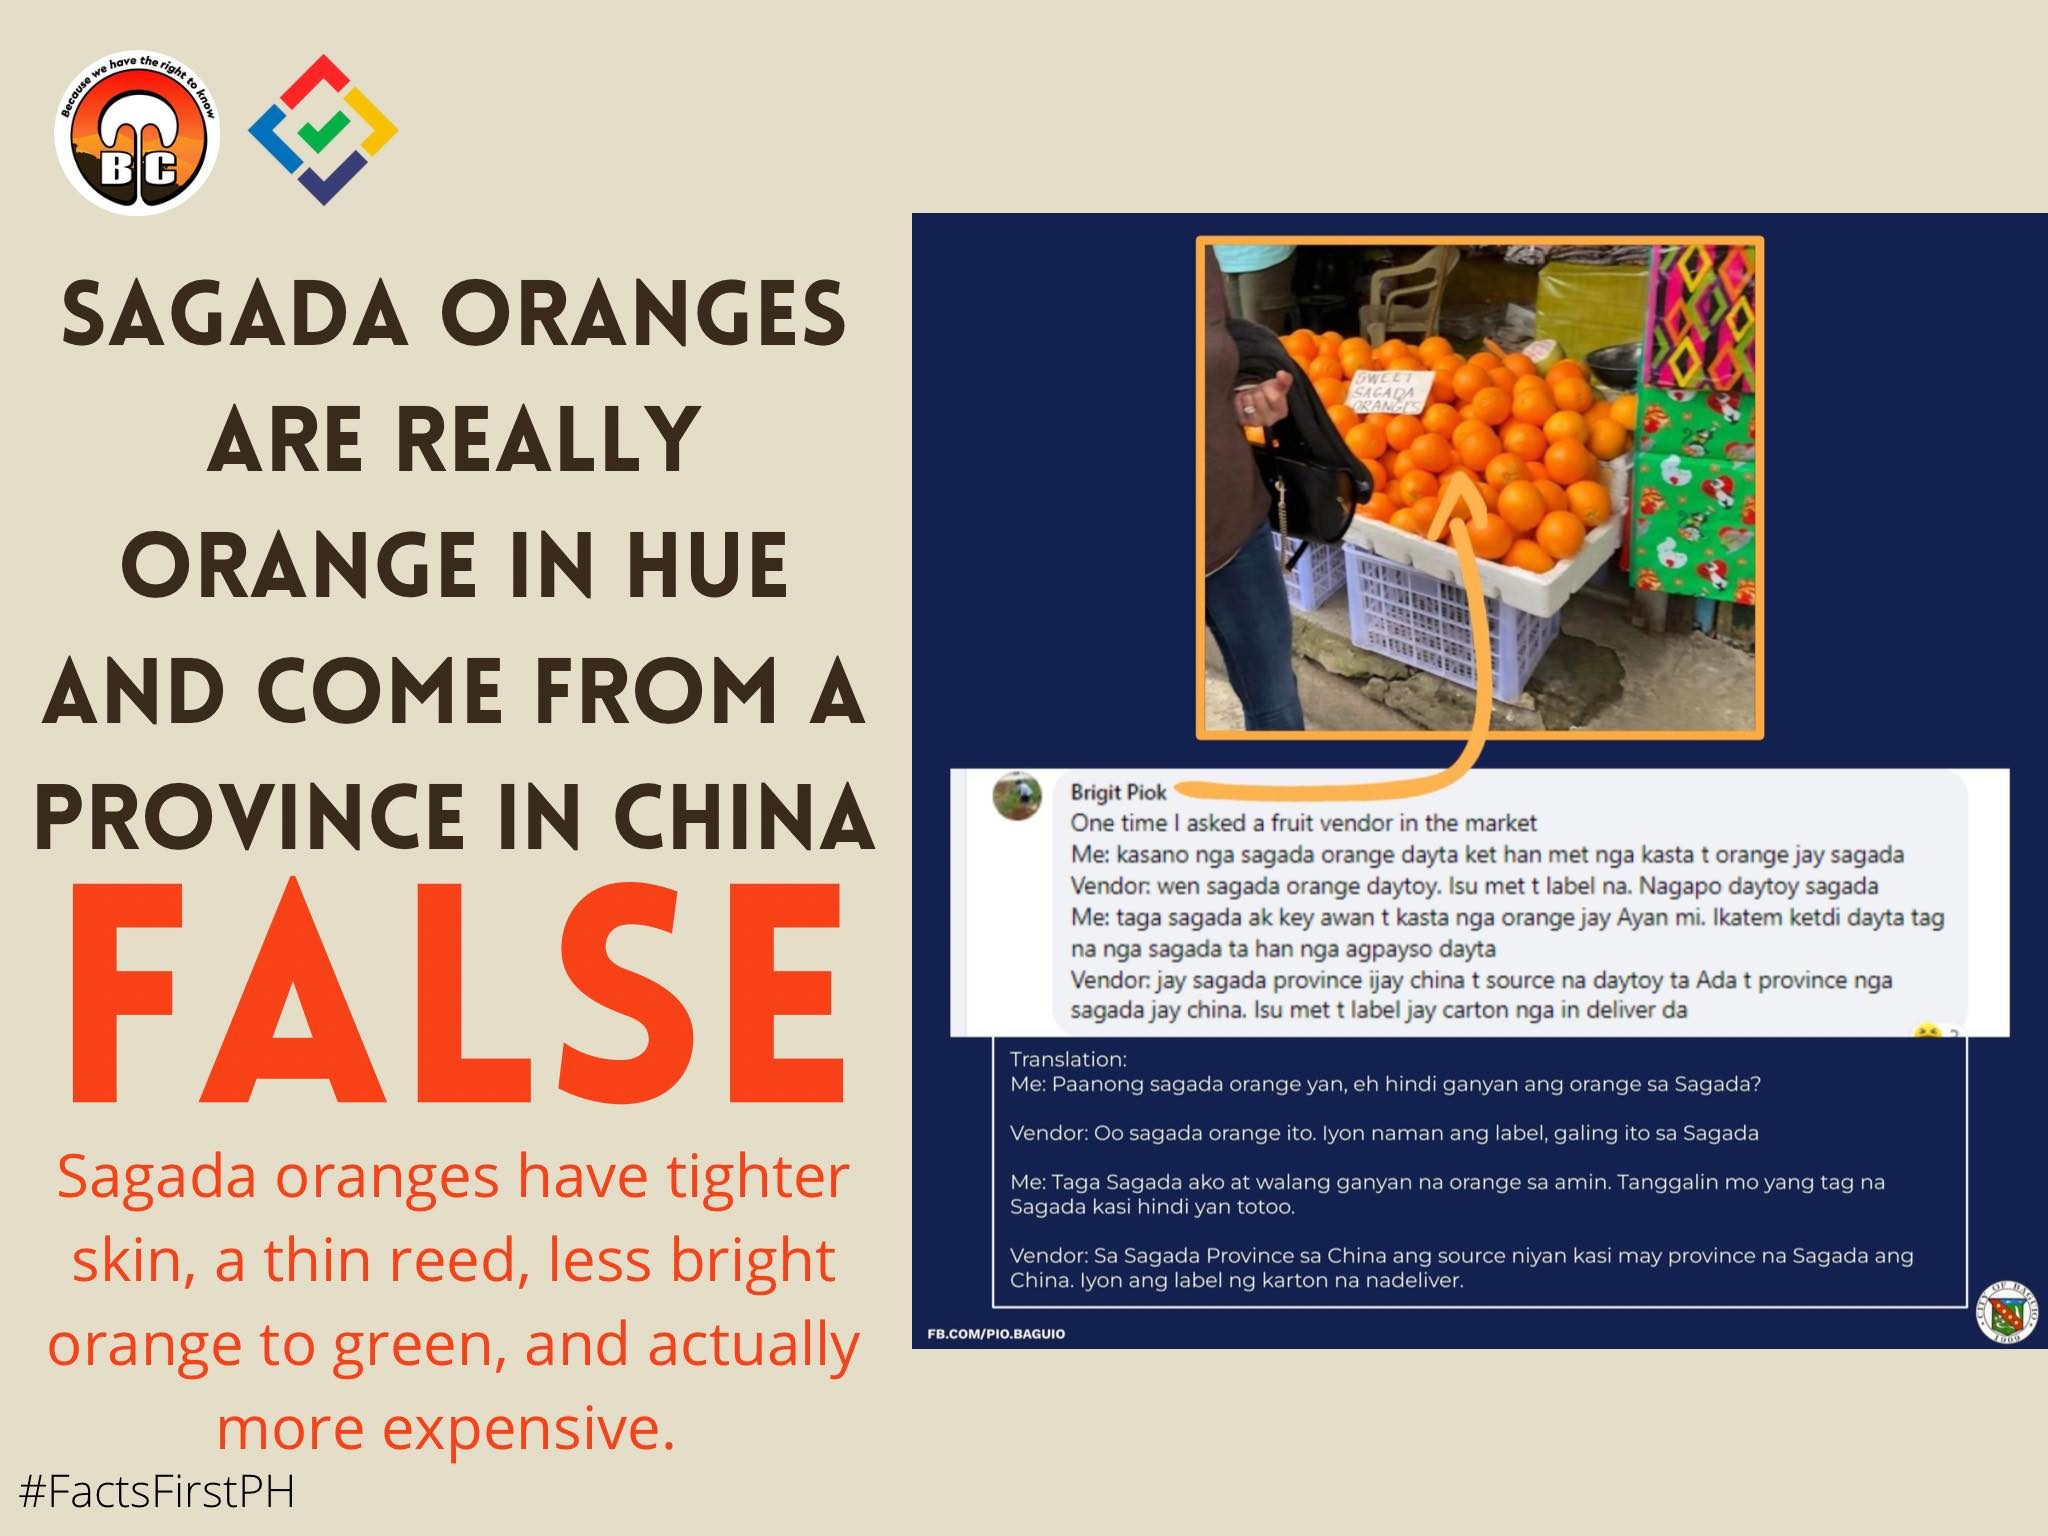 FACT CHECK: Sagada oranges are really orange in hue and come from a province in China #FactsFirstPH